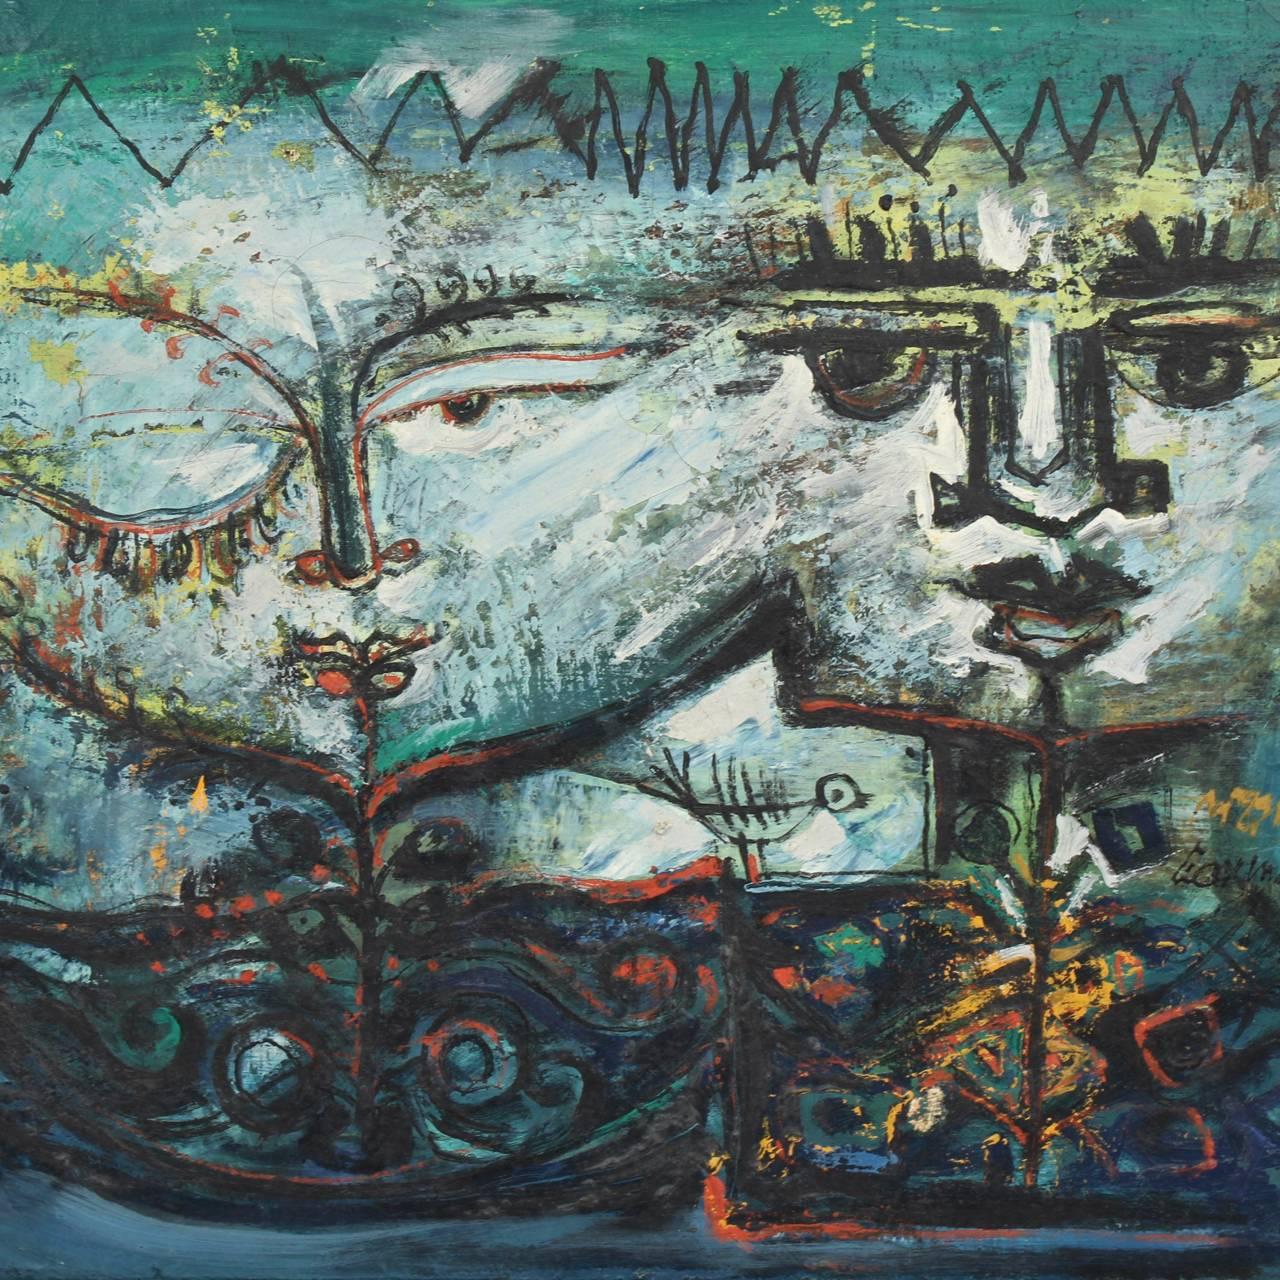 Lake.

An original oil on canvas painting by the Indian Modernist, Laxman Pai.

Dated, 1969

Signed and dated lower right and to the reverse of the canvas.

Measures: Frame size: 
Height: ca. 15 1/8 in.
Width: ca. 19 1/8 in.

sight size: 
Height: